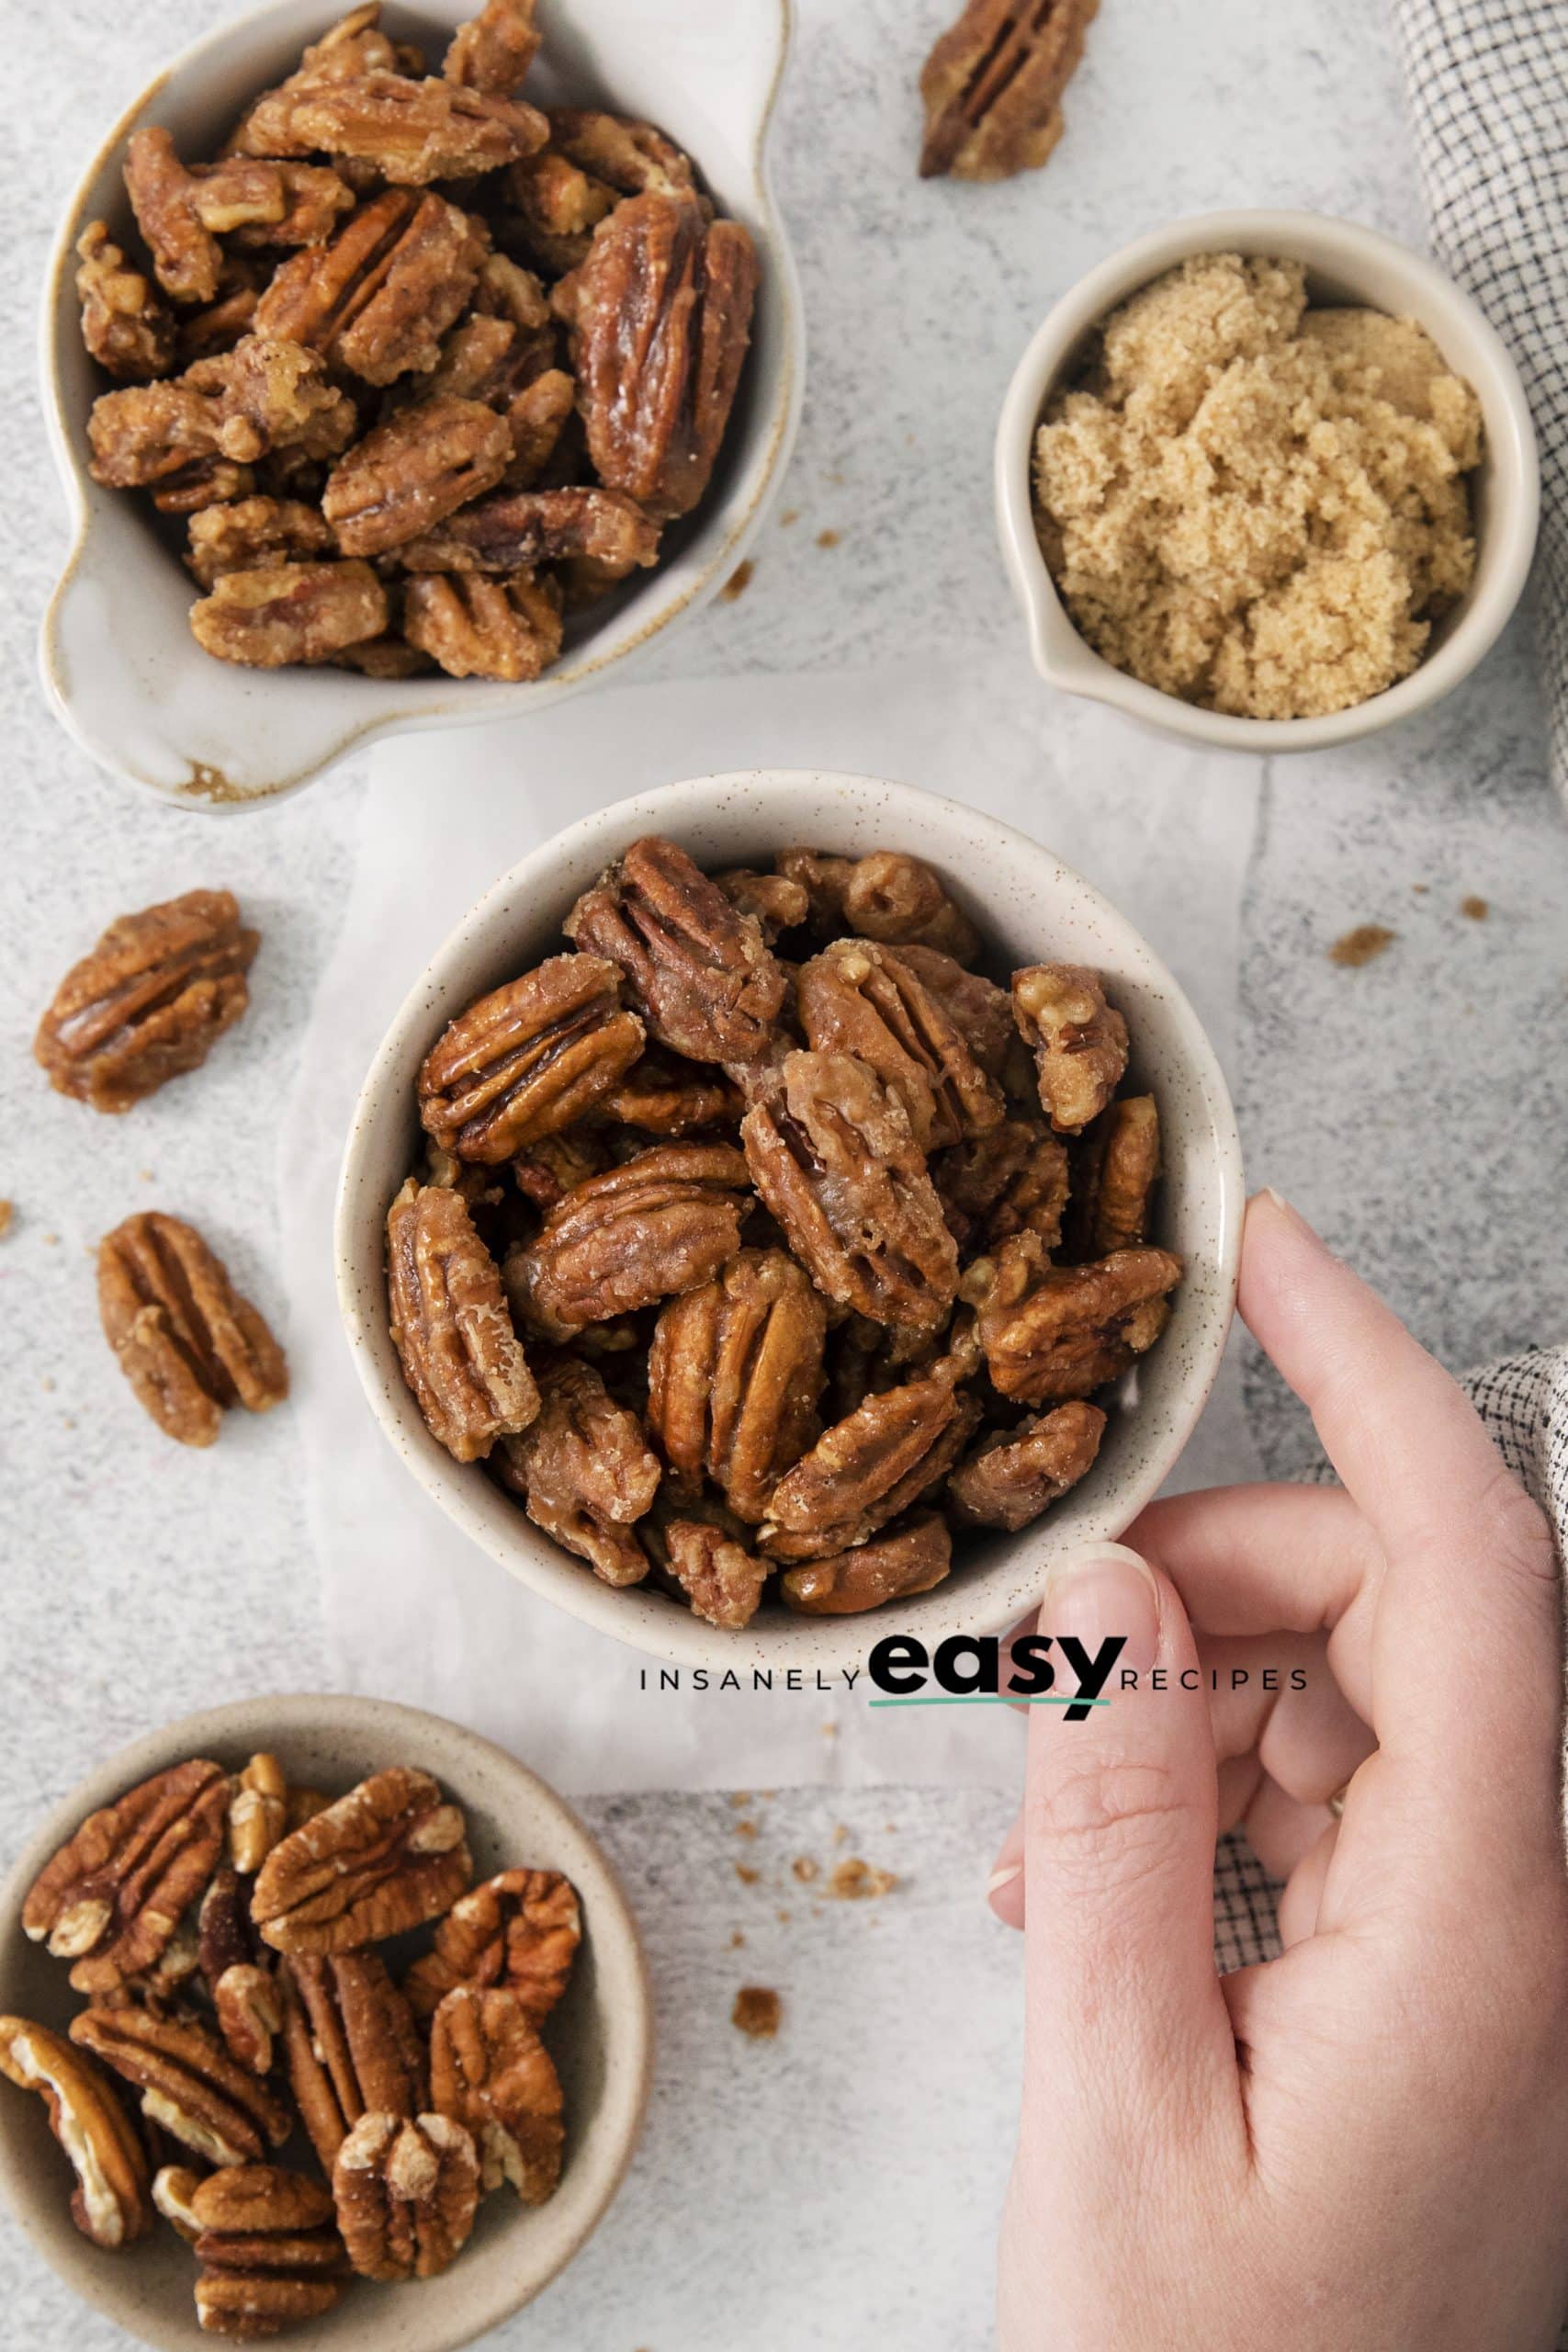 Top view photo of a bowl filled with Candied Pecans. There is a hand reaching in to grab the cup. The bowl is surrounded by other bowls, filled with brown sugar and raw pecans. 